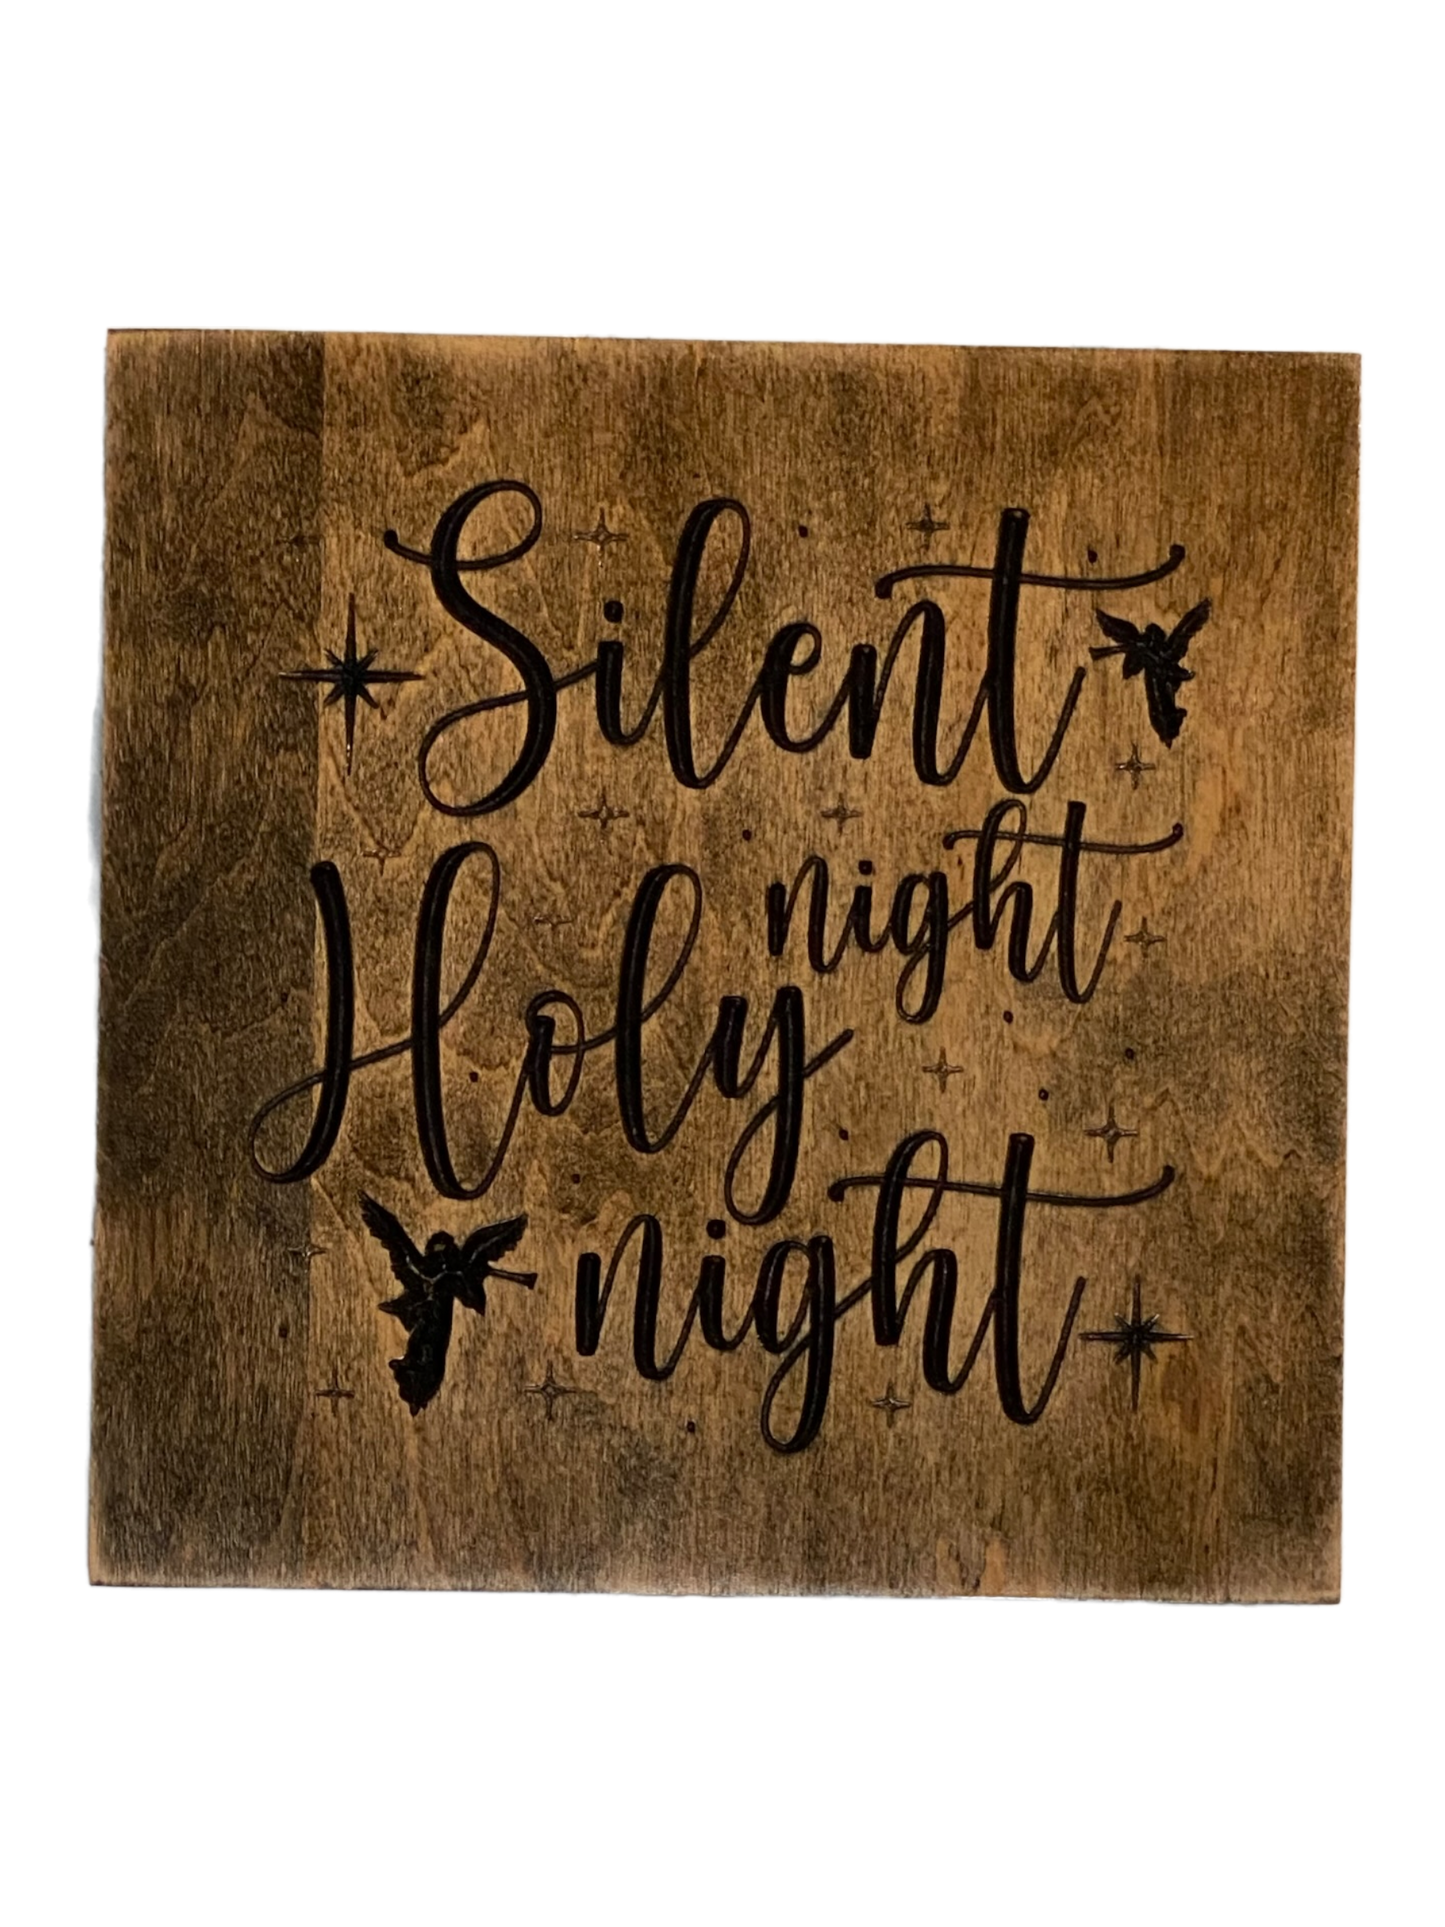 Silent Night Holy Night Christmas Wood Carved Wall Art